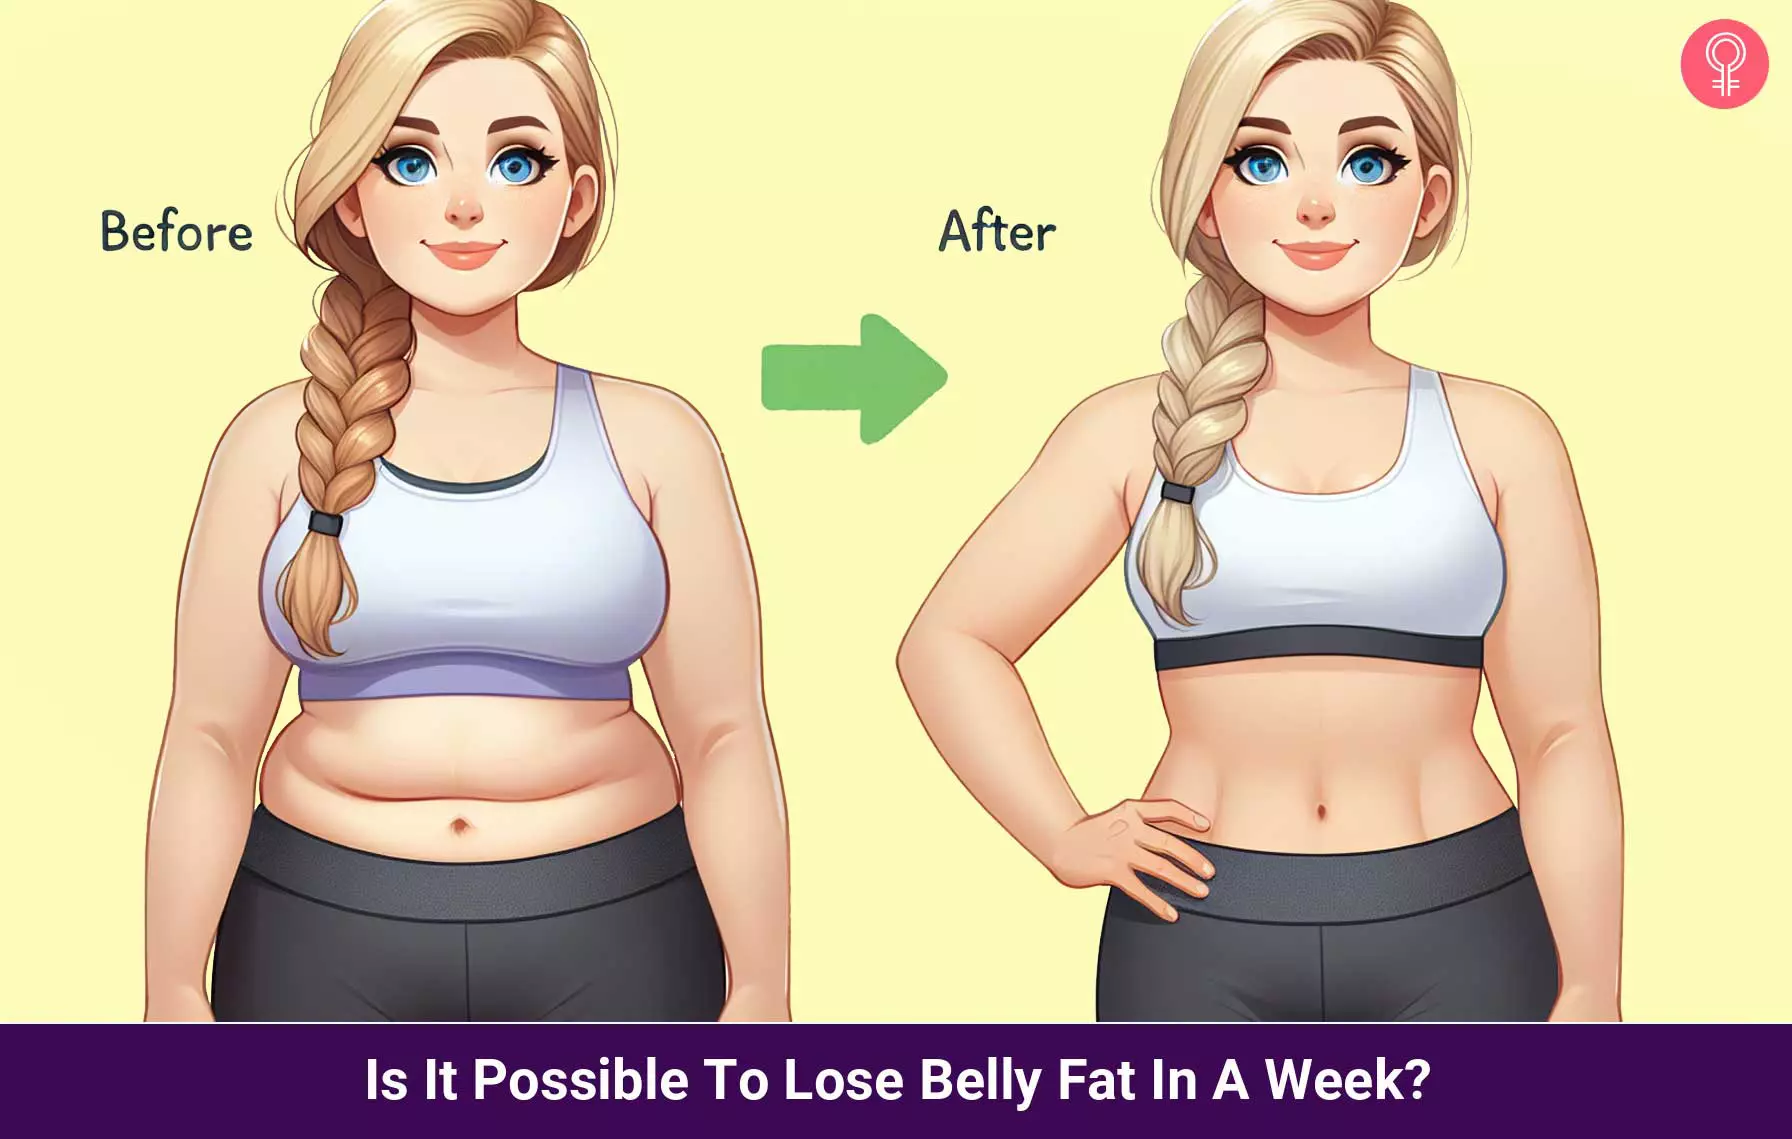 Is It Possible To Lose Belly Fat In A Week?